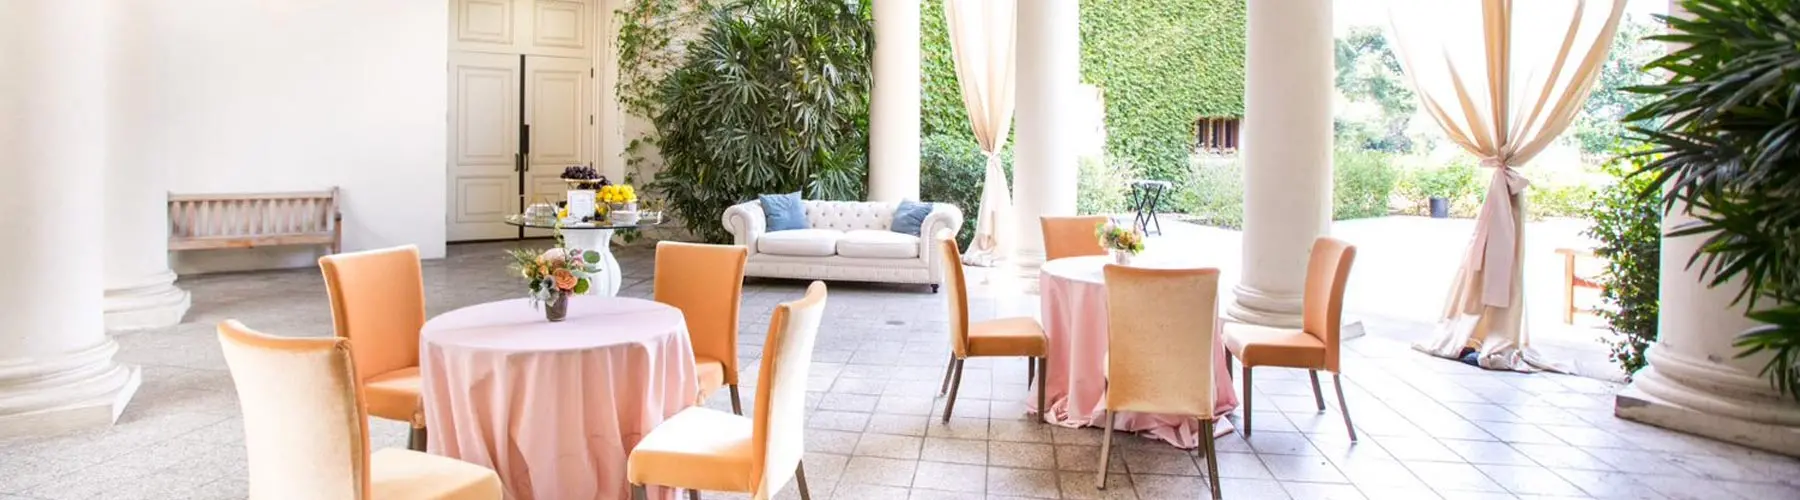 Light peach tableclothes and tan chairs fill an outdoor loggia.